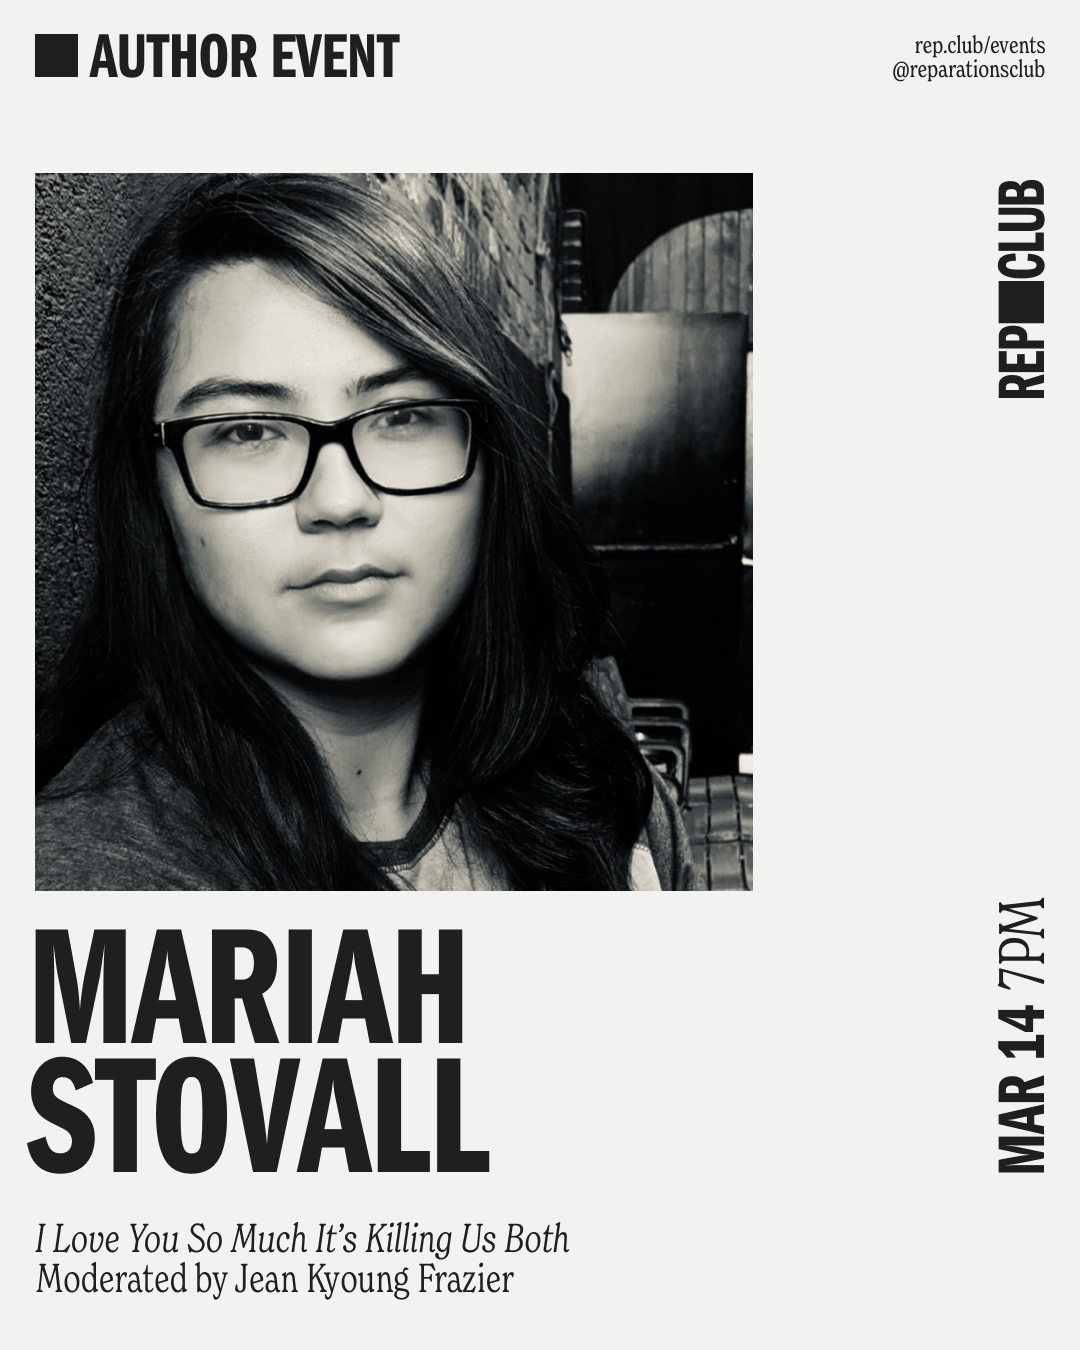 March 14th EVENT: I Love You So Much It's Killing Us Both // Mariah Stovall + Jean Kyoung Frazier